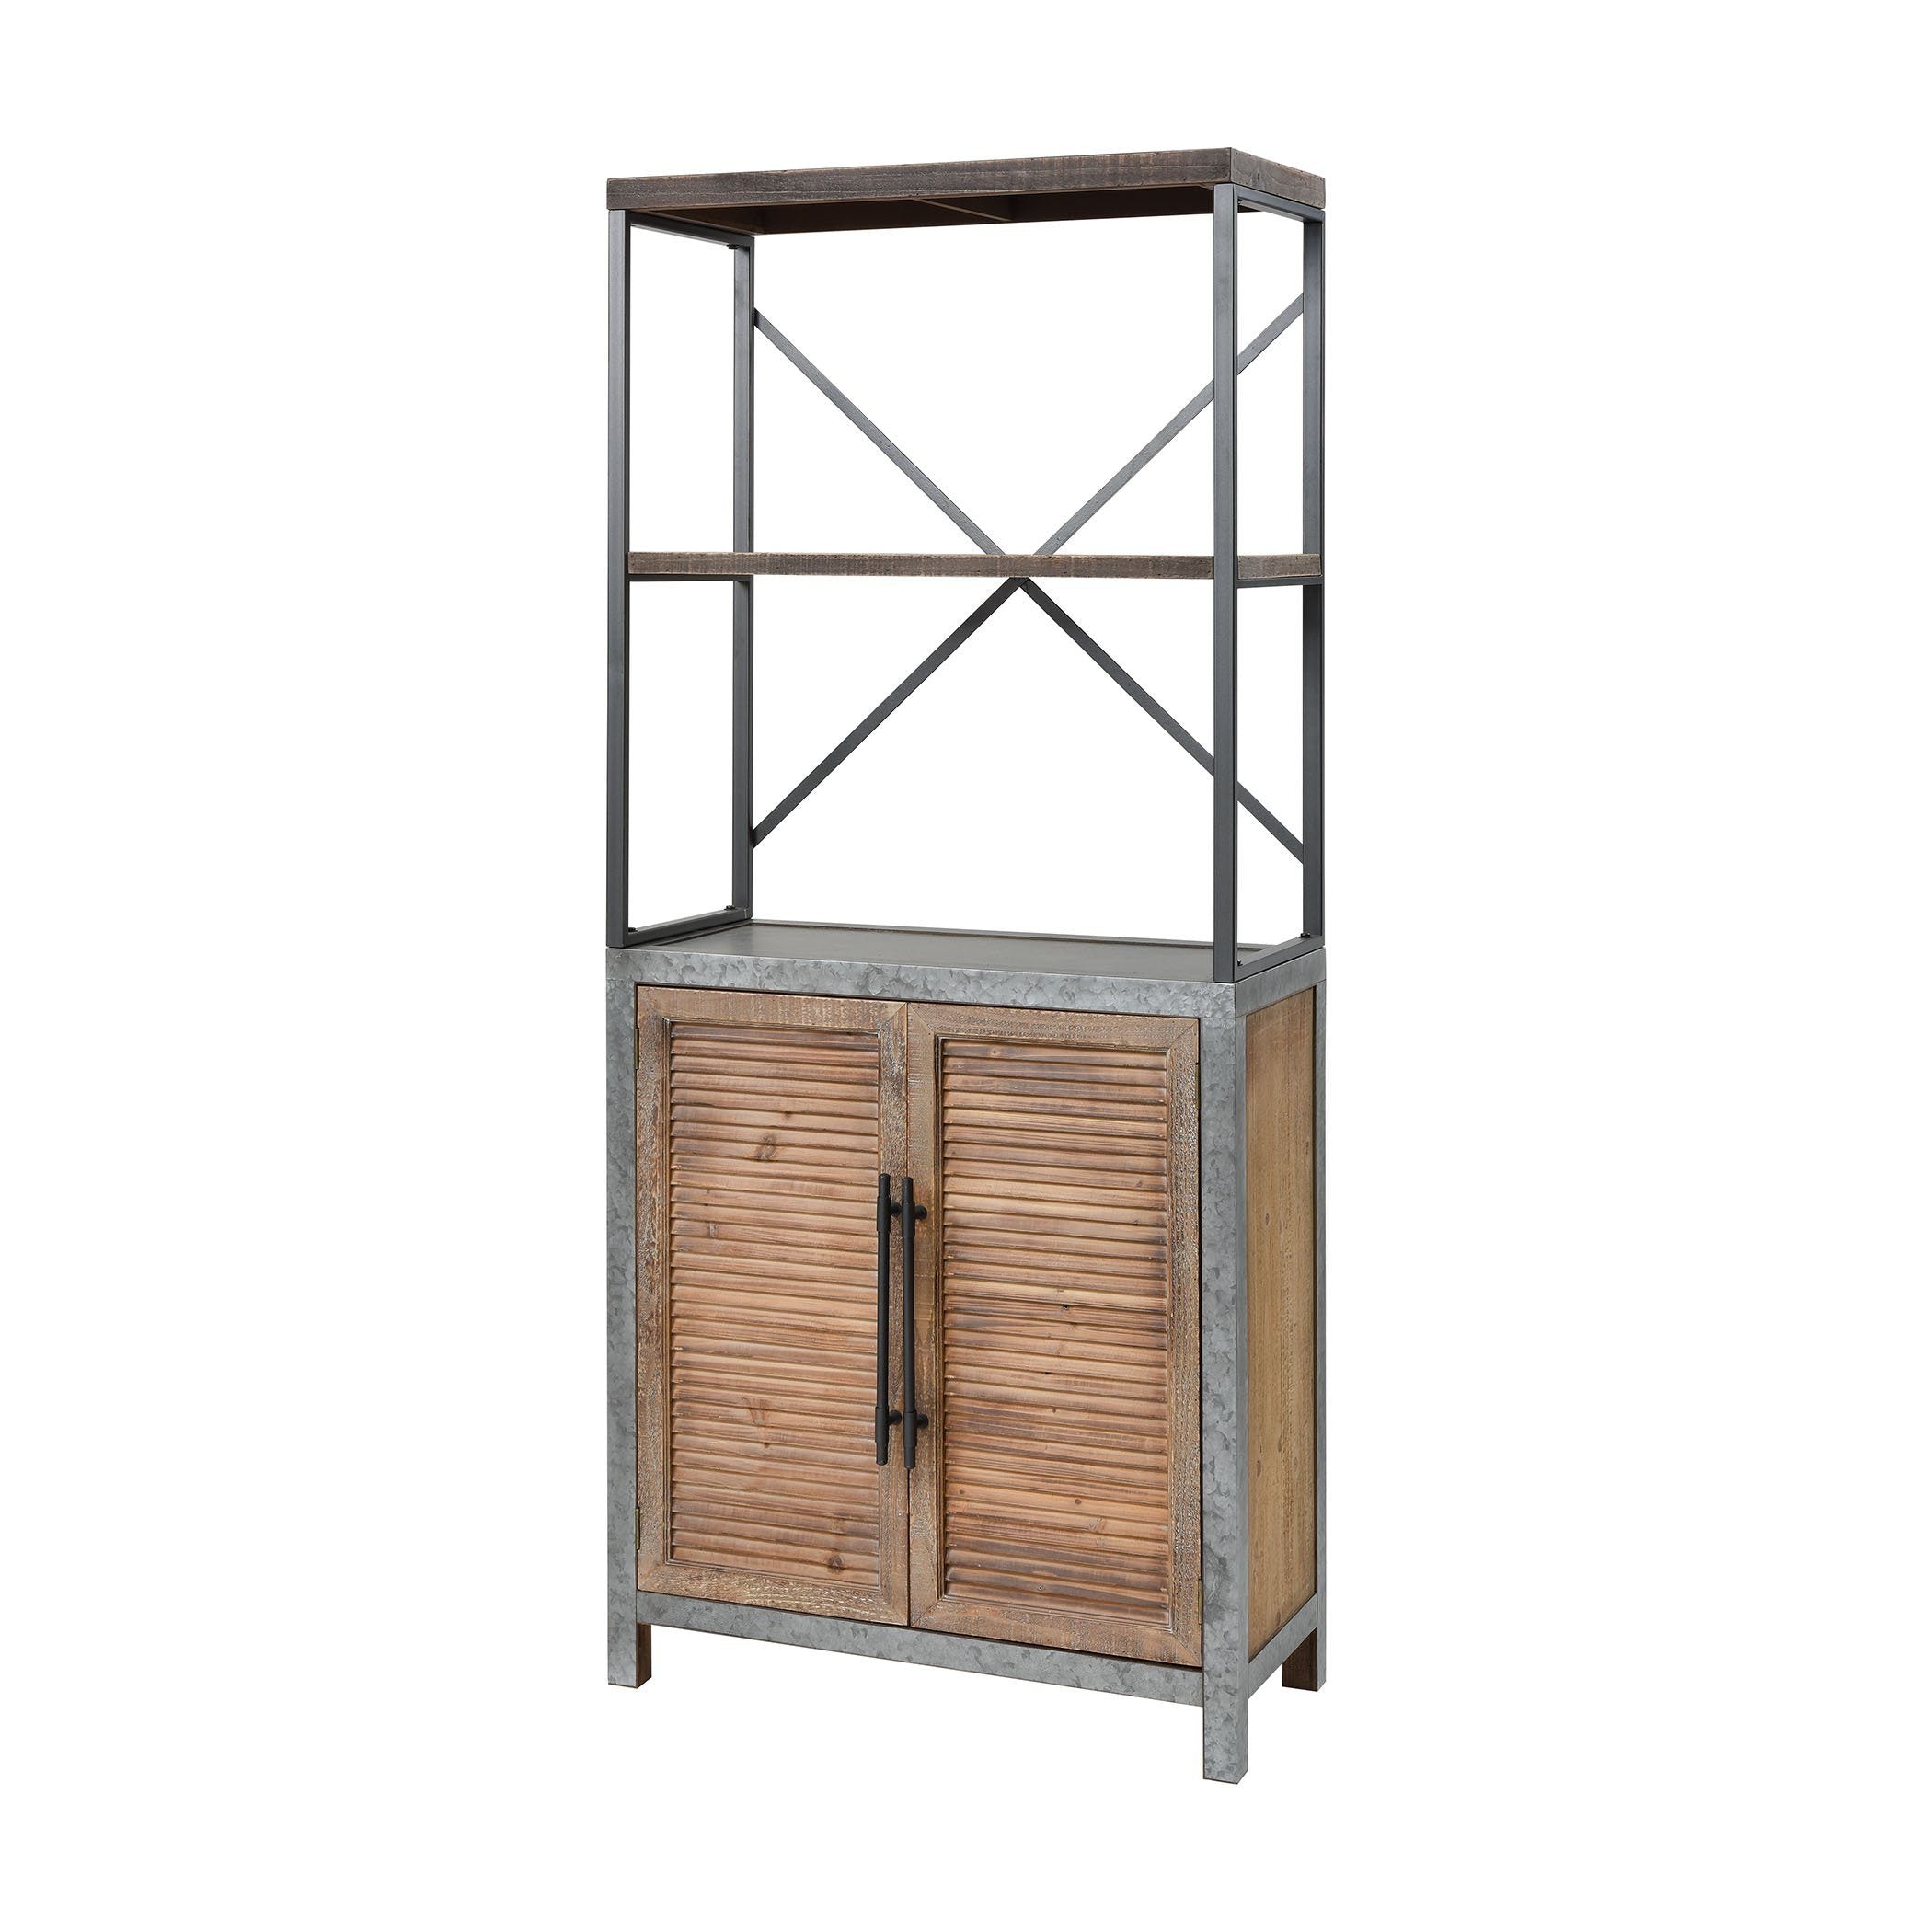 Badlands Drifted Oak with Aged Iron 2-Door Wood and Metal Bookcase Furniture Sterling 